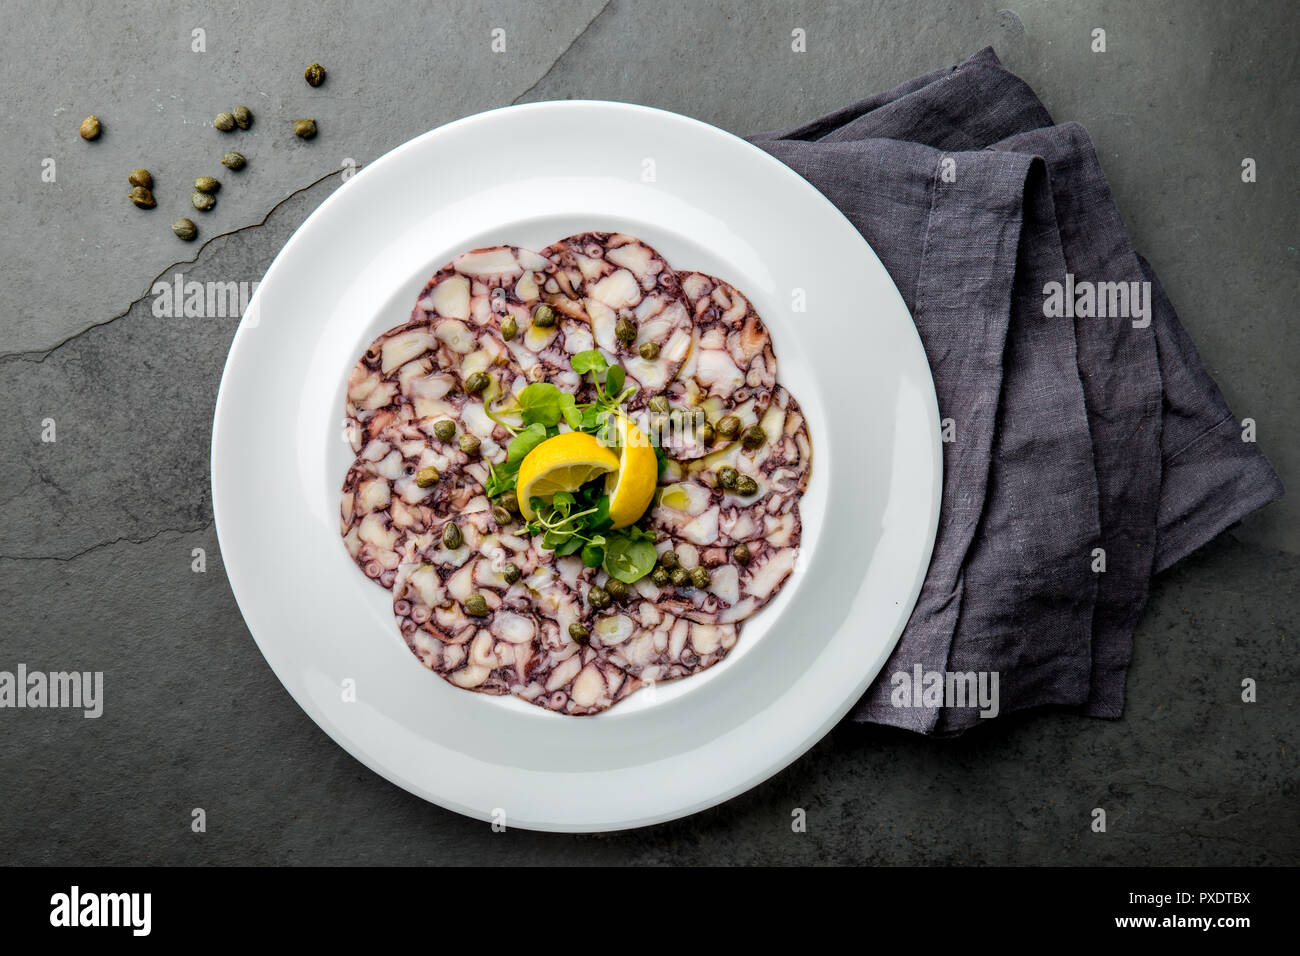 OCTOPUS CARPACCIO. Seafood Raw octopus slices with olive oil, lemon and capers on white plate. Top view. Gray stone background. Stock Photo